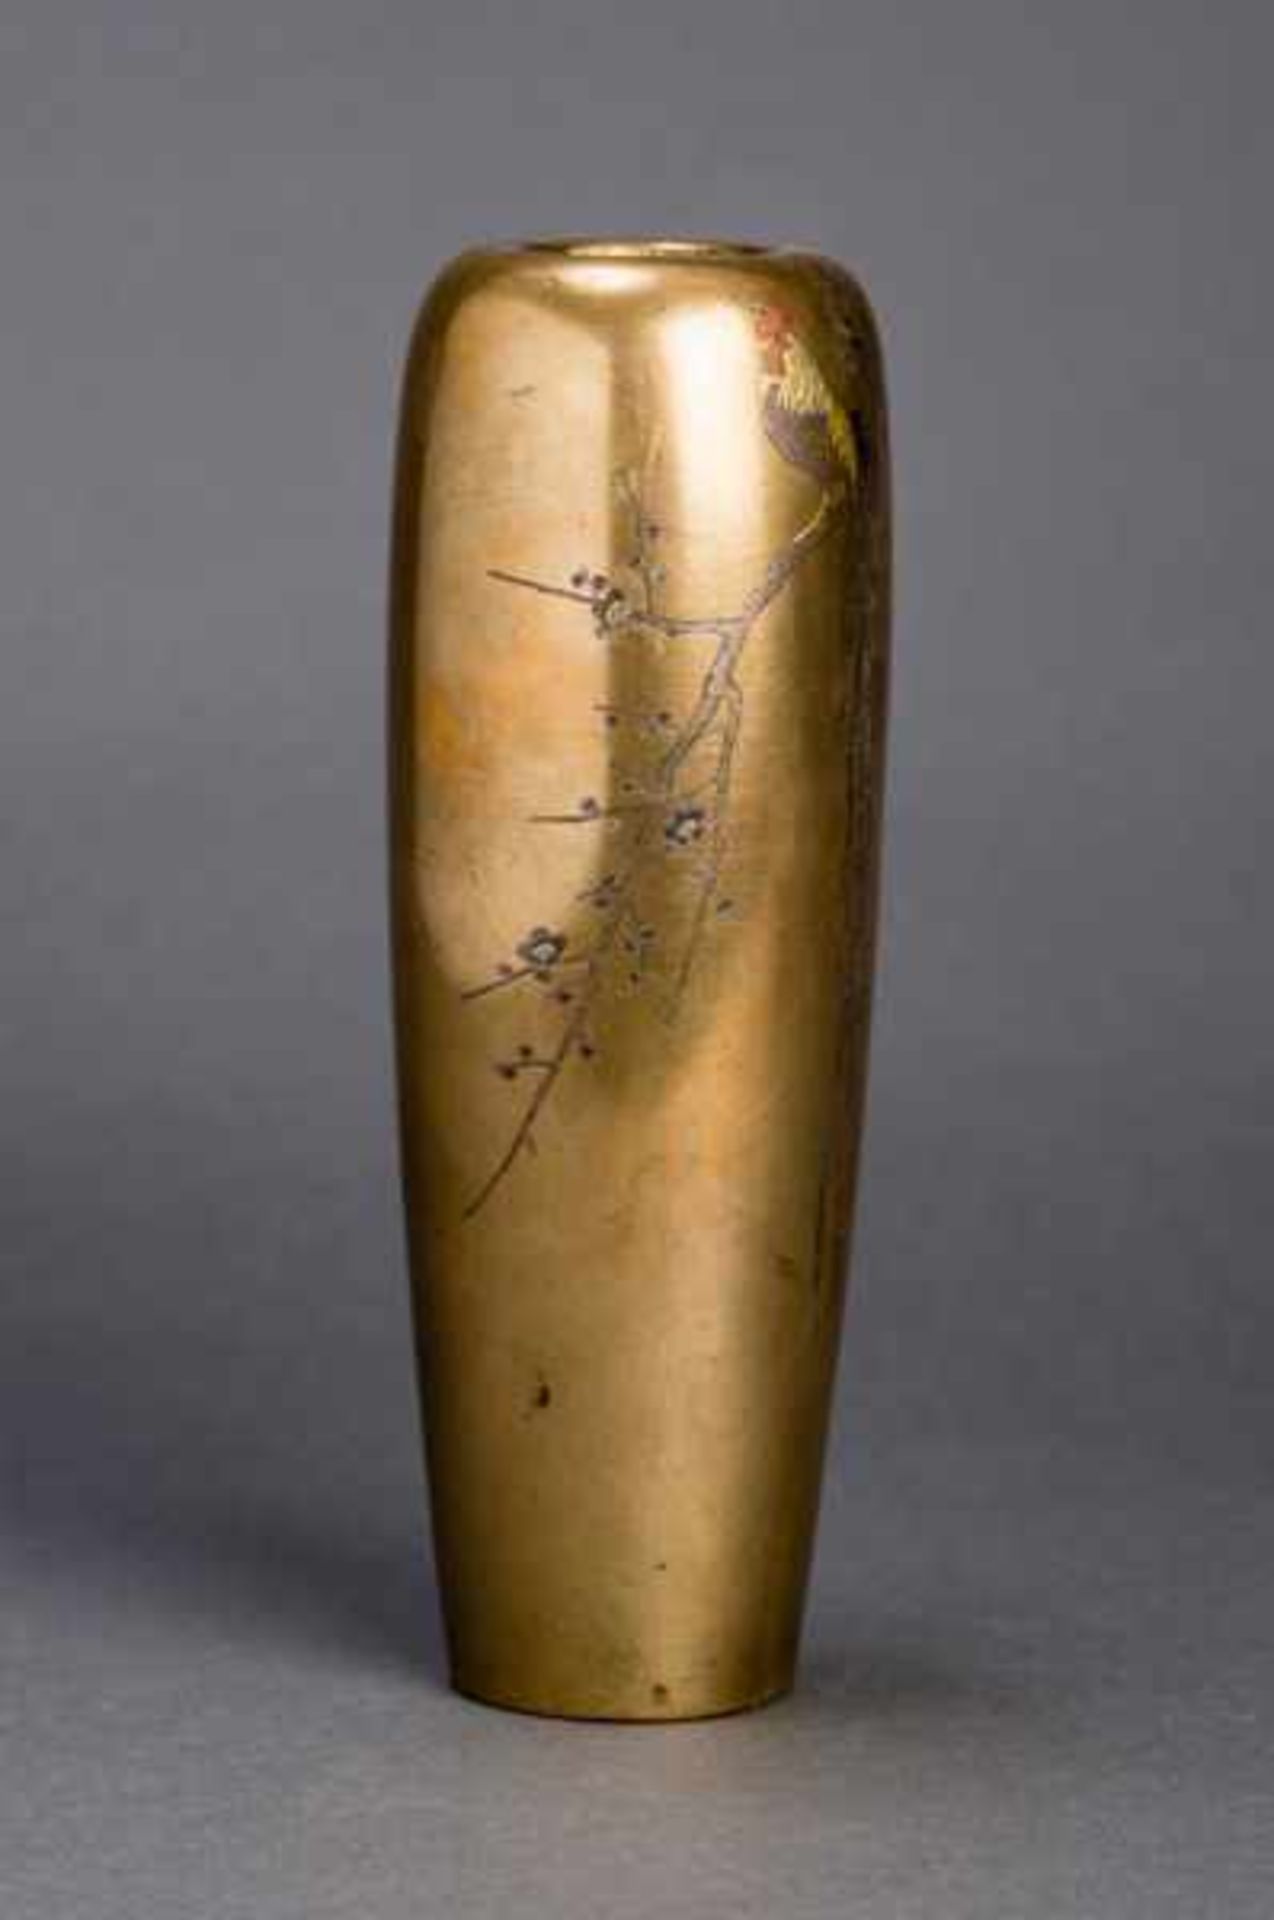 KURODA: BRONZE VASE WITH ROOSTER Gold-yellow bronze. Japan, 19th century to Meiji periodTall, - Image 2 of 5